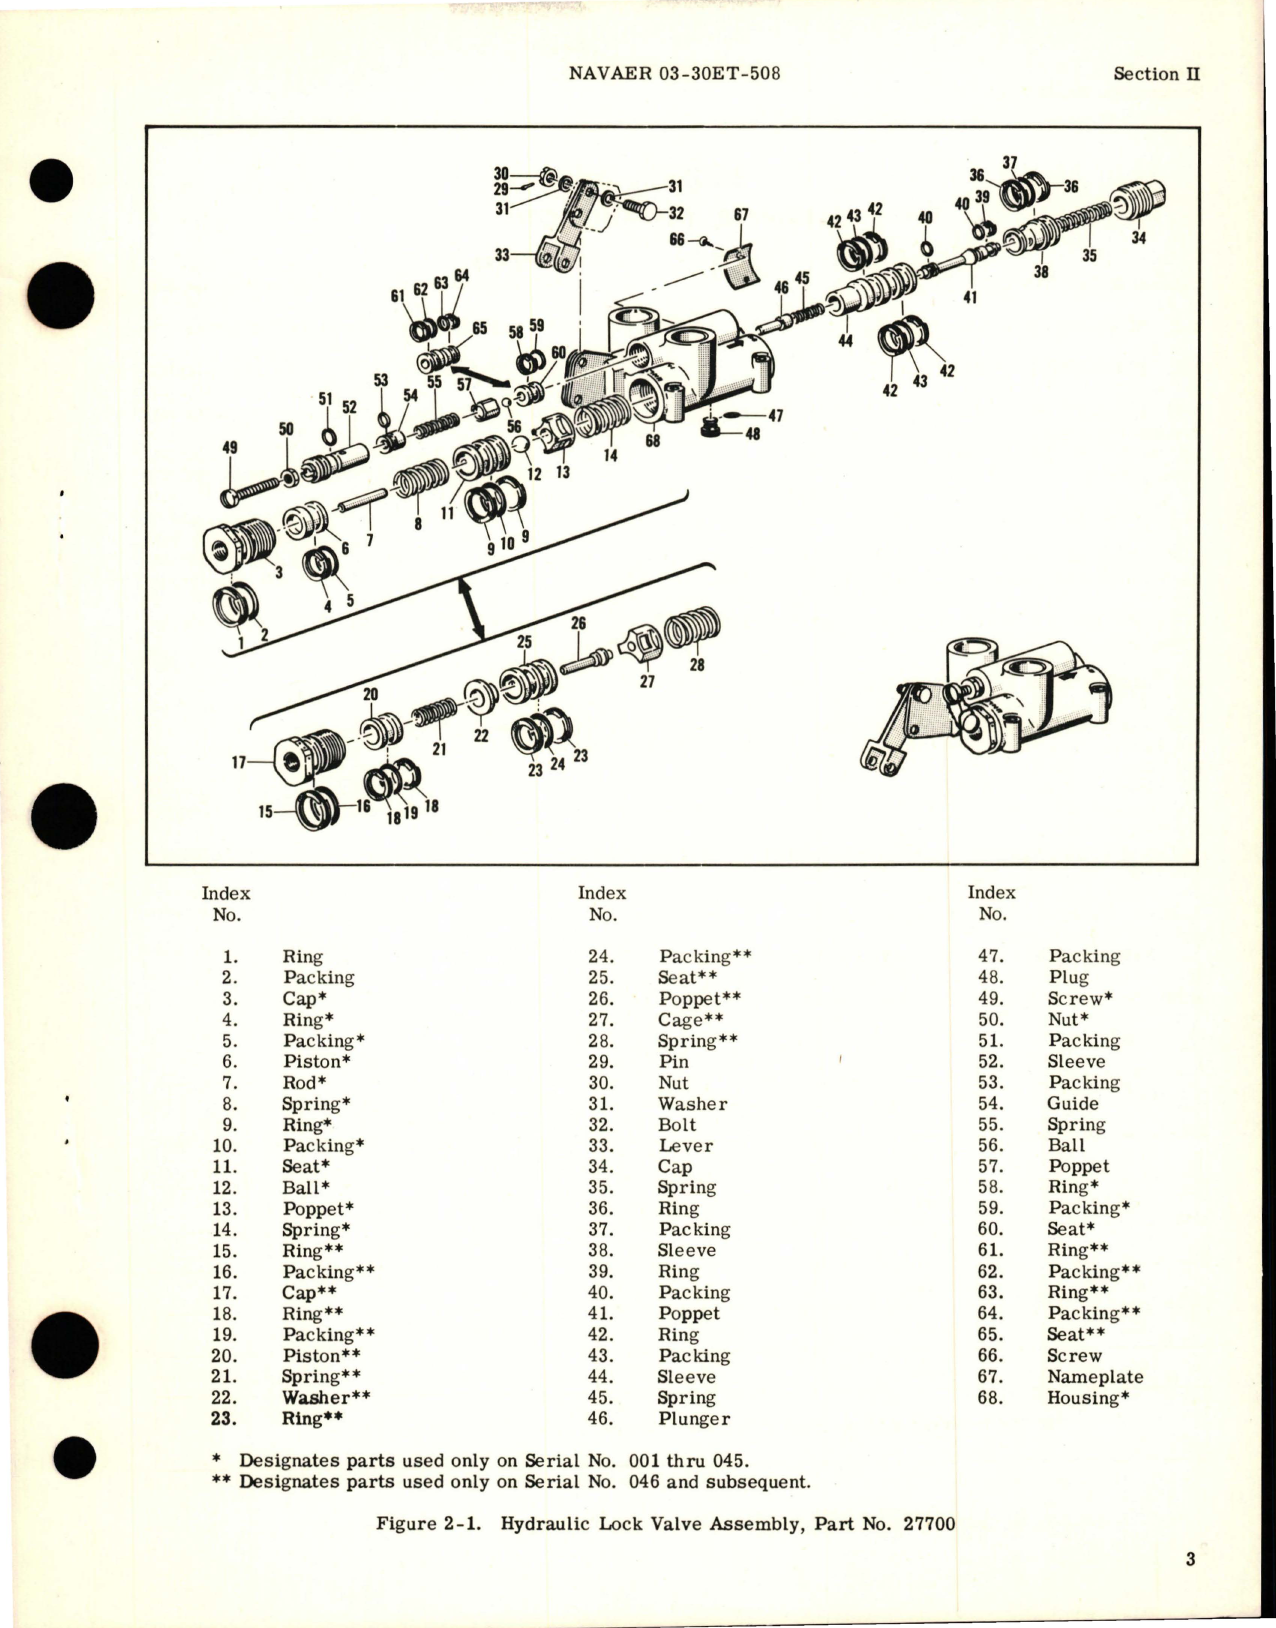 Sample page 5 from AirCorps Library document: Overhaul Instructions for Hydraulic Lock Valve Assembly - Part 27700